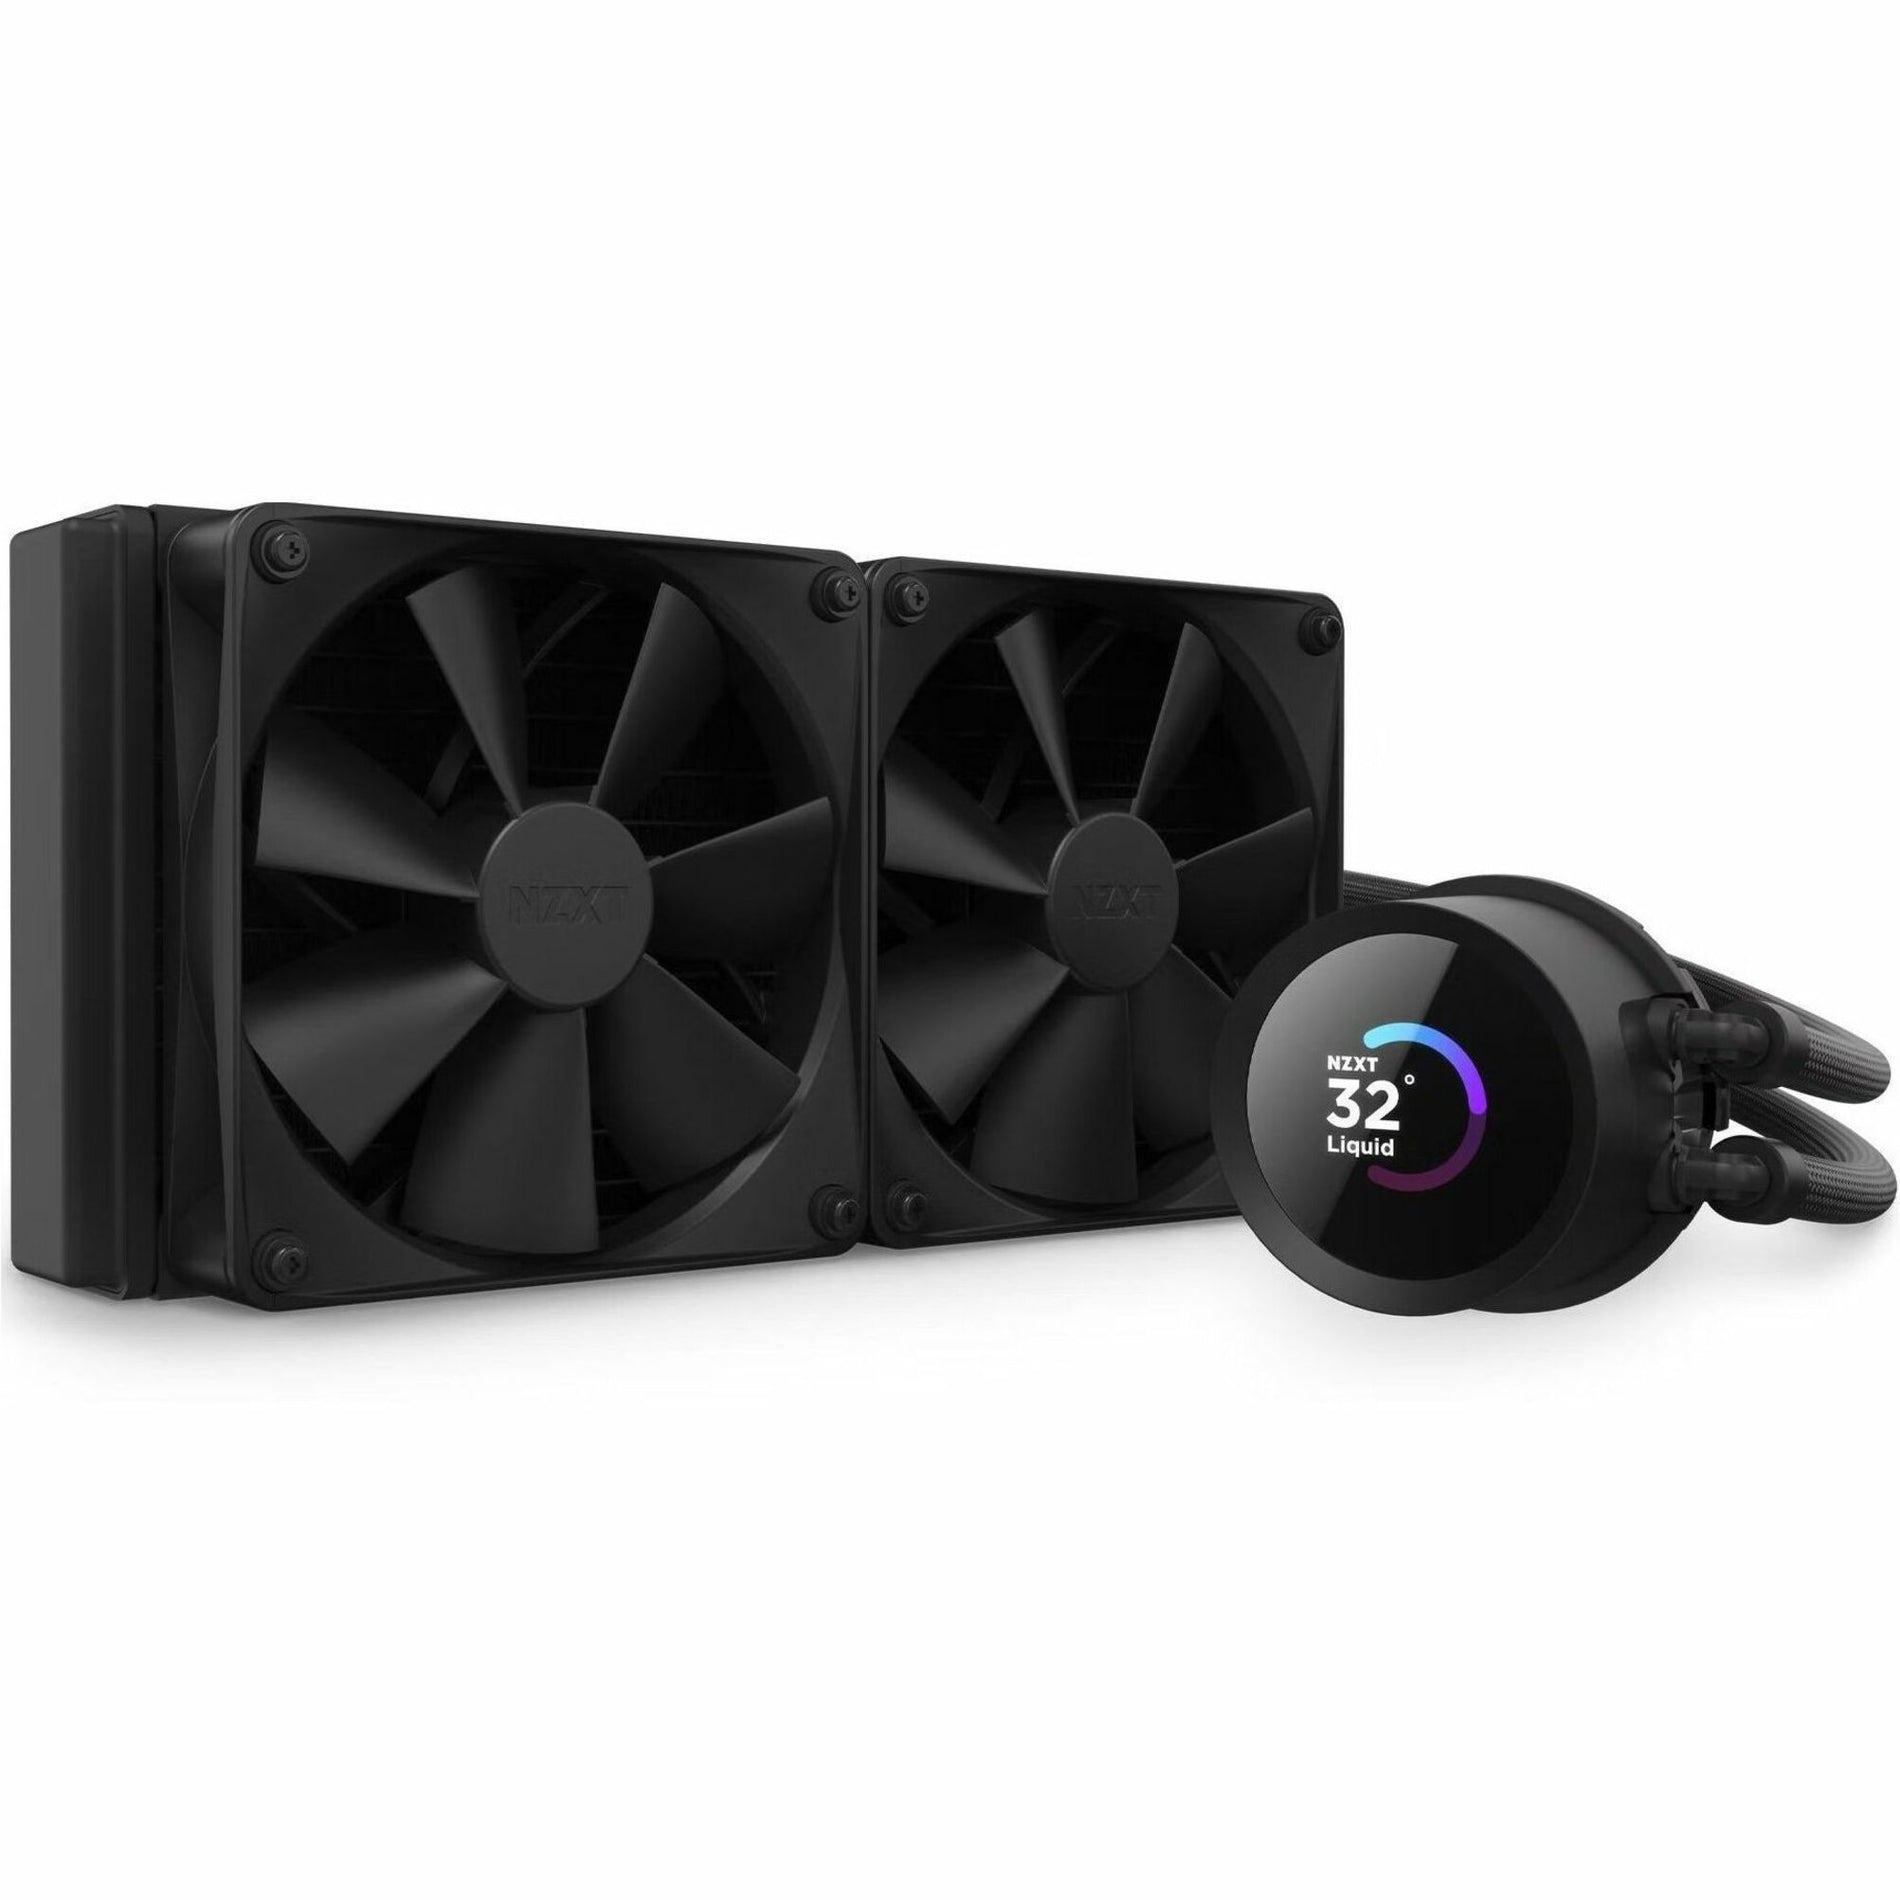 NZXT RL-KN240-B1 Kraken 240 240mm AIO Liquid Cooler with LCD Display High Performance Cooling Solution